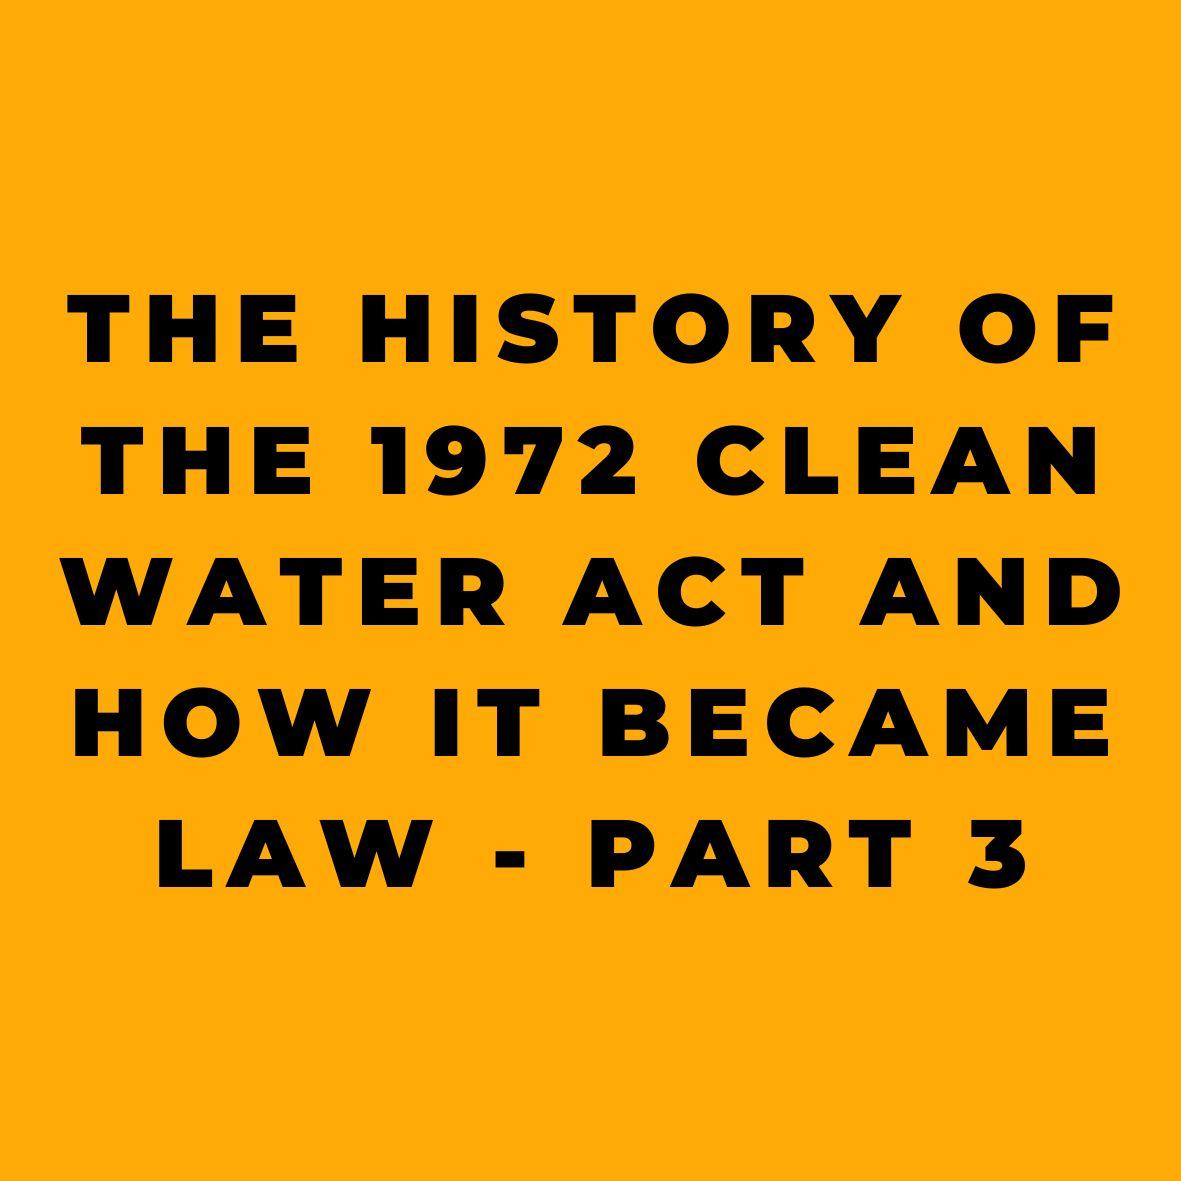 The History of the 1972 Clean Water Act And How it Became Law Part 3